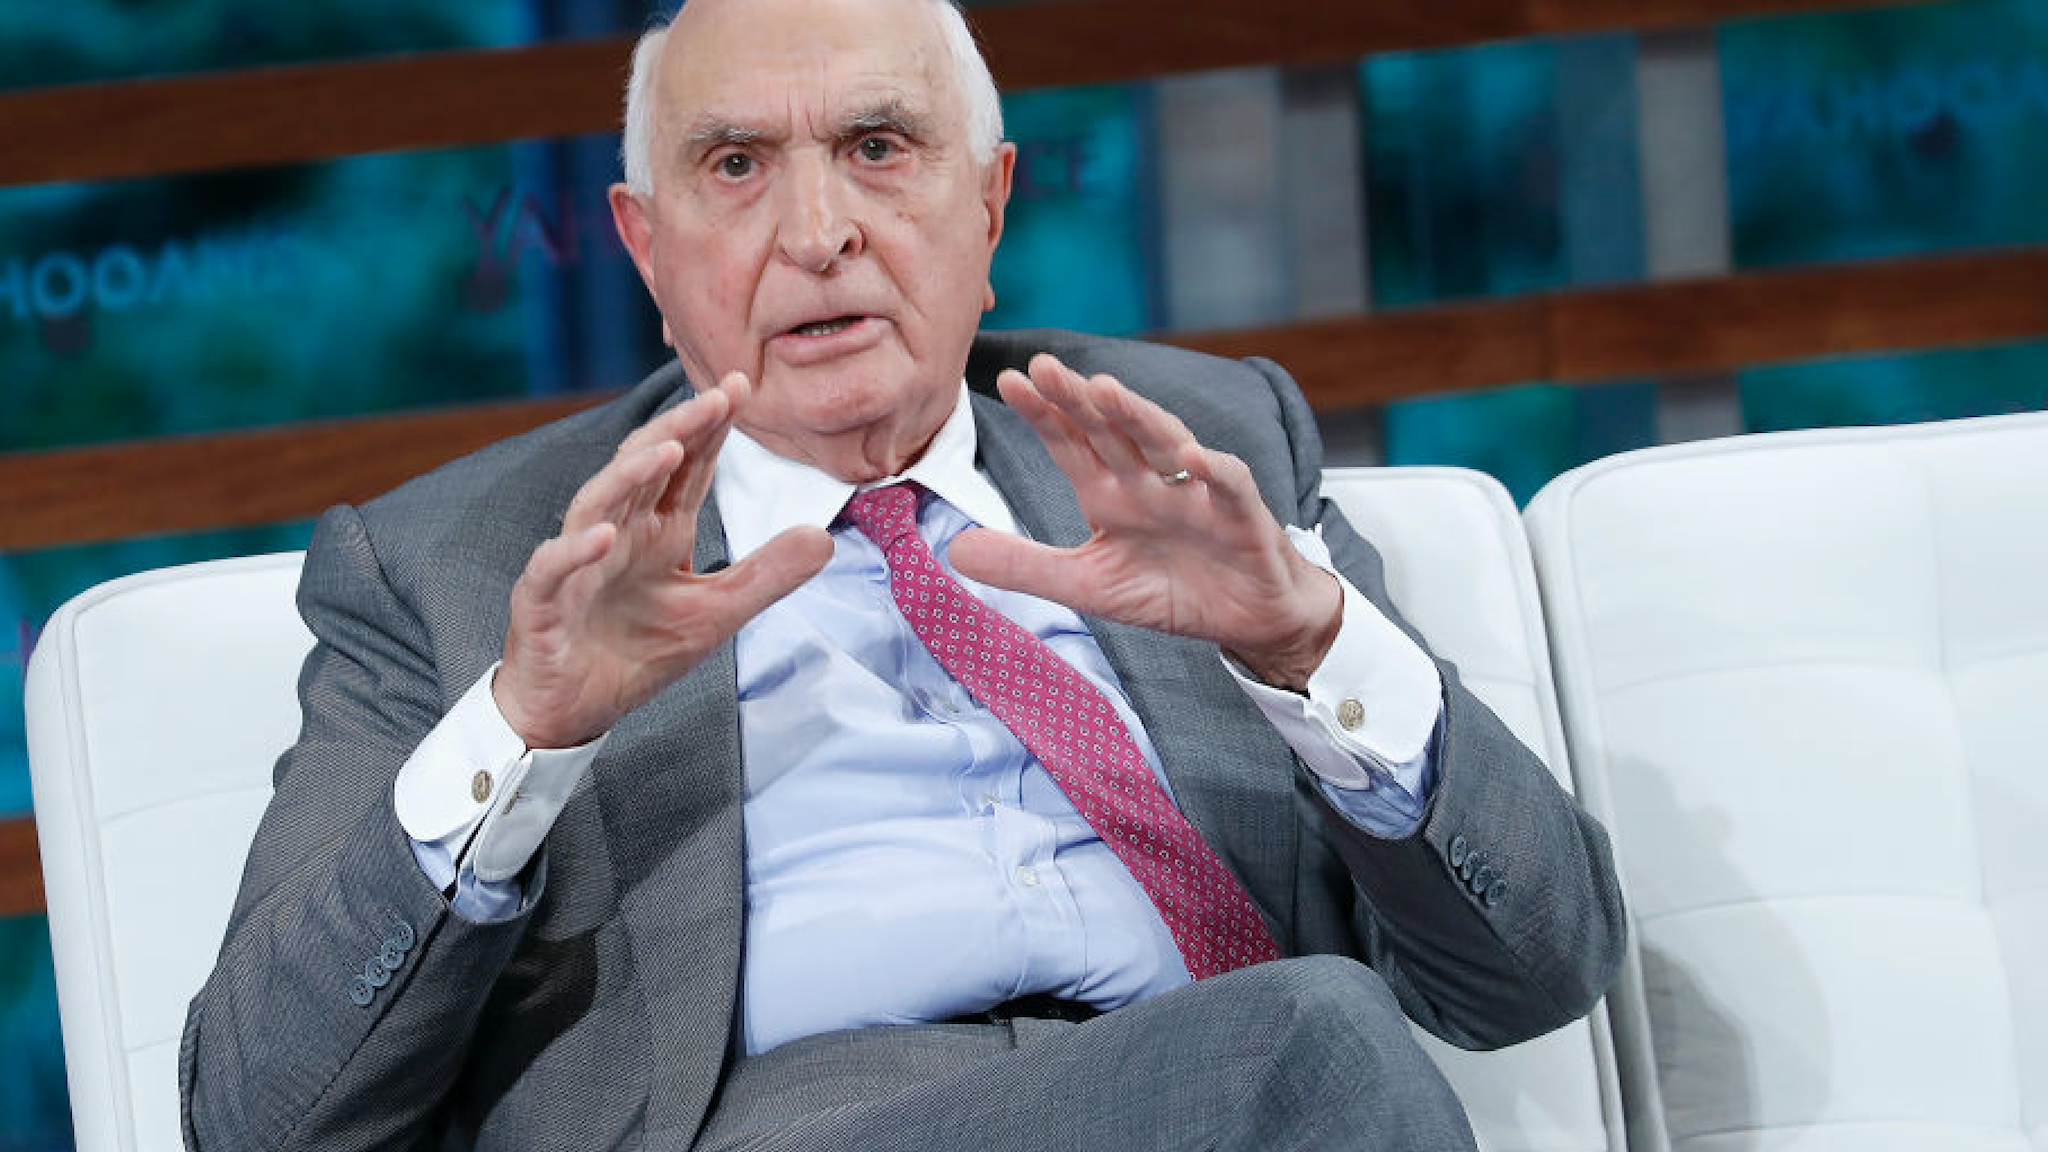 Home Depot co-funders Ken Langone peaks during the 2018 Yahoo Finance All Markets Summit at The Times Center on September 20, 2018 in New York City.